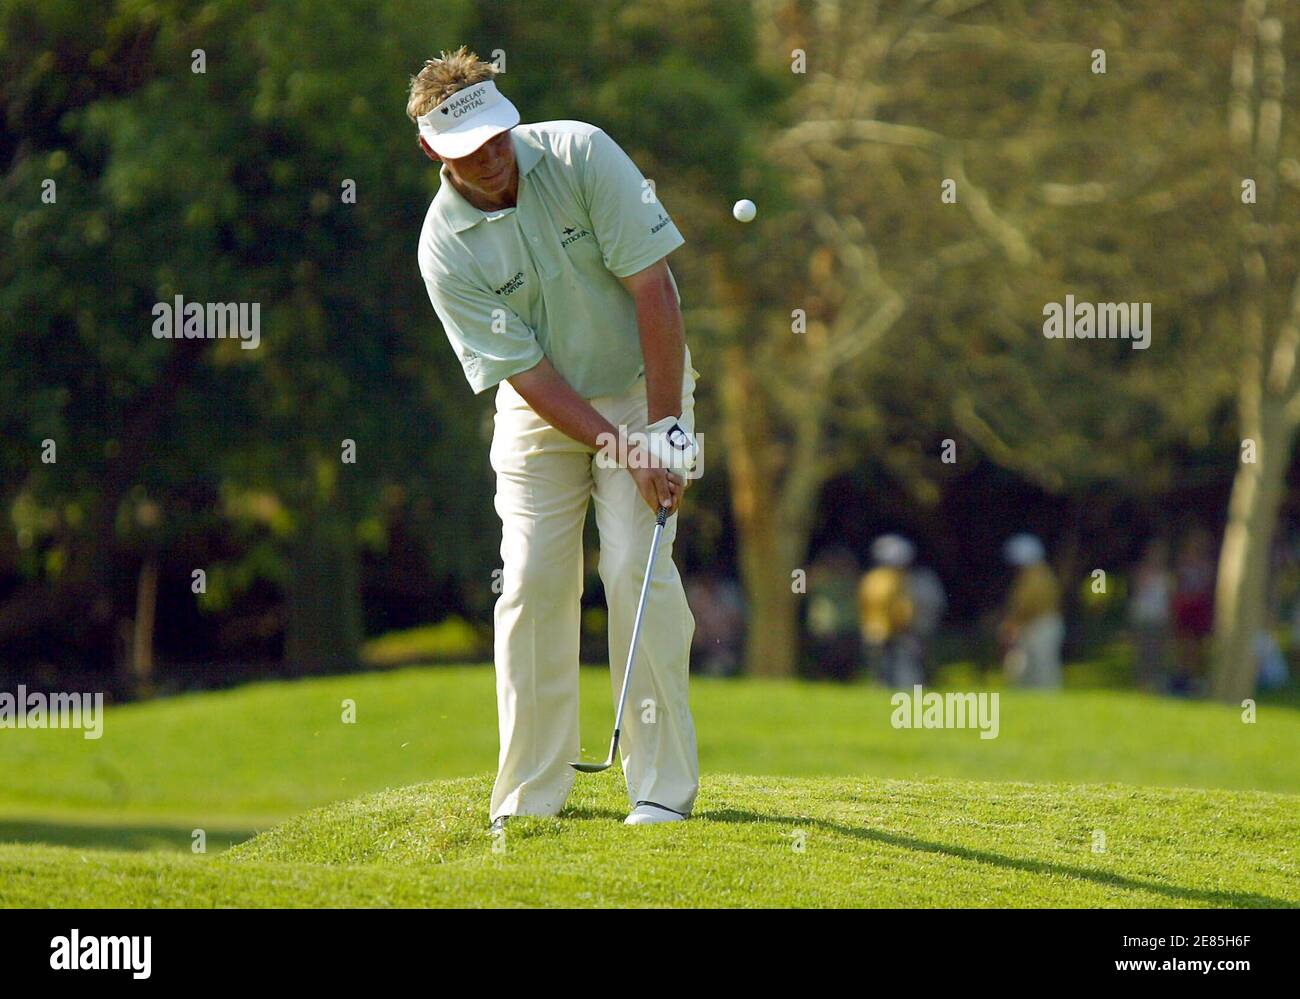 Britain's Darren Clarke plays a shot at the 18th hole during the second round of the $4 million Sun City Golf Challenge in Sun City, South Africa December 2, 2005. Clarke finished at seven-under-par. REUTERS/Juda Ngwenya Stock Photo